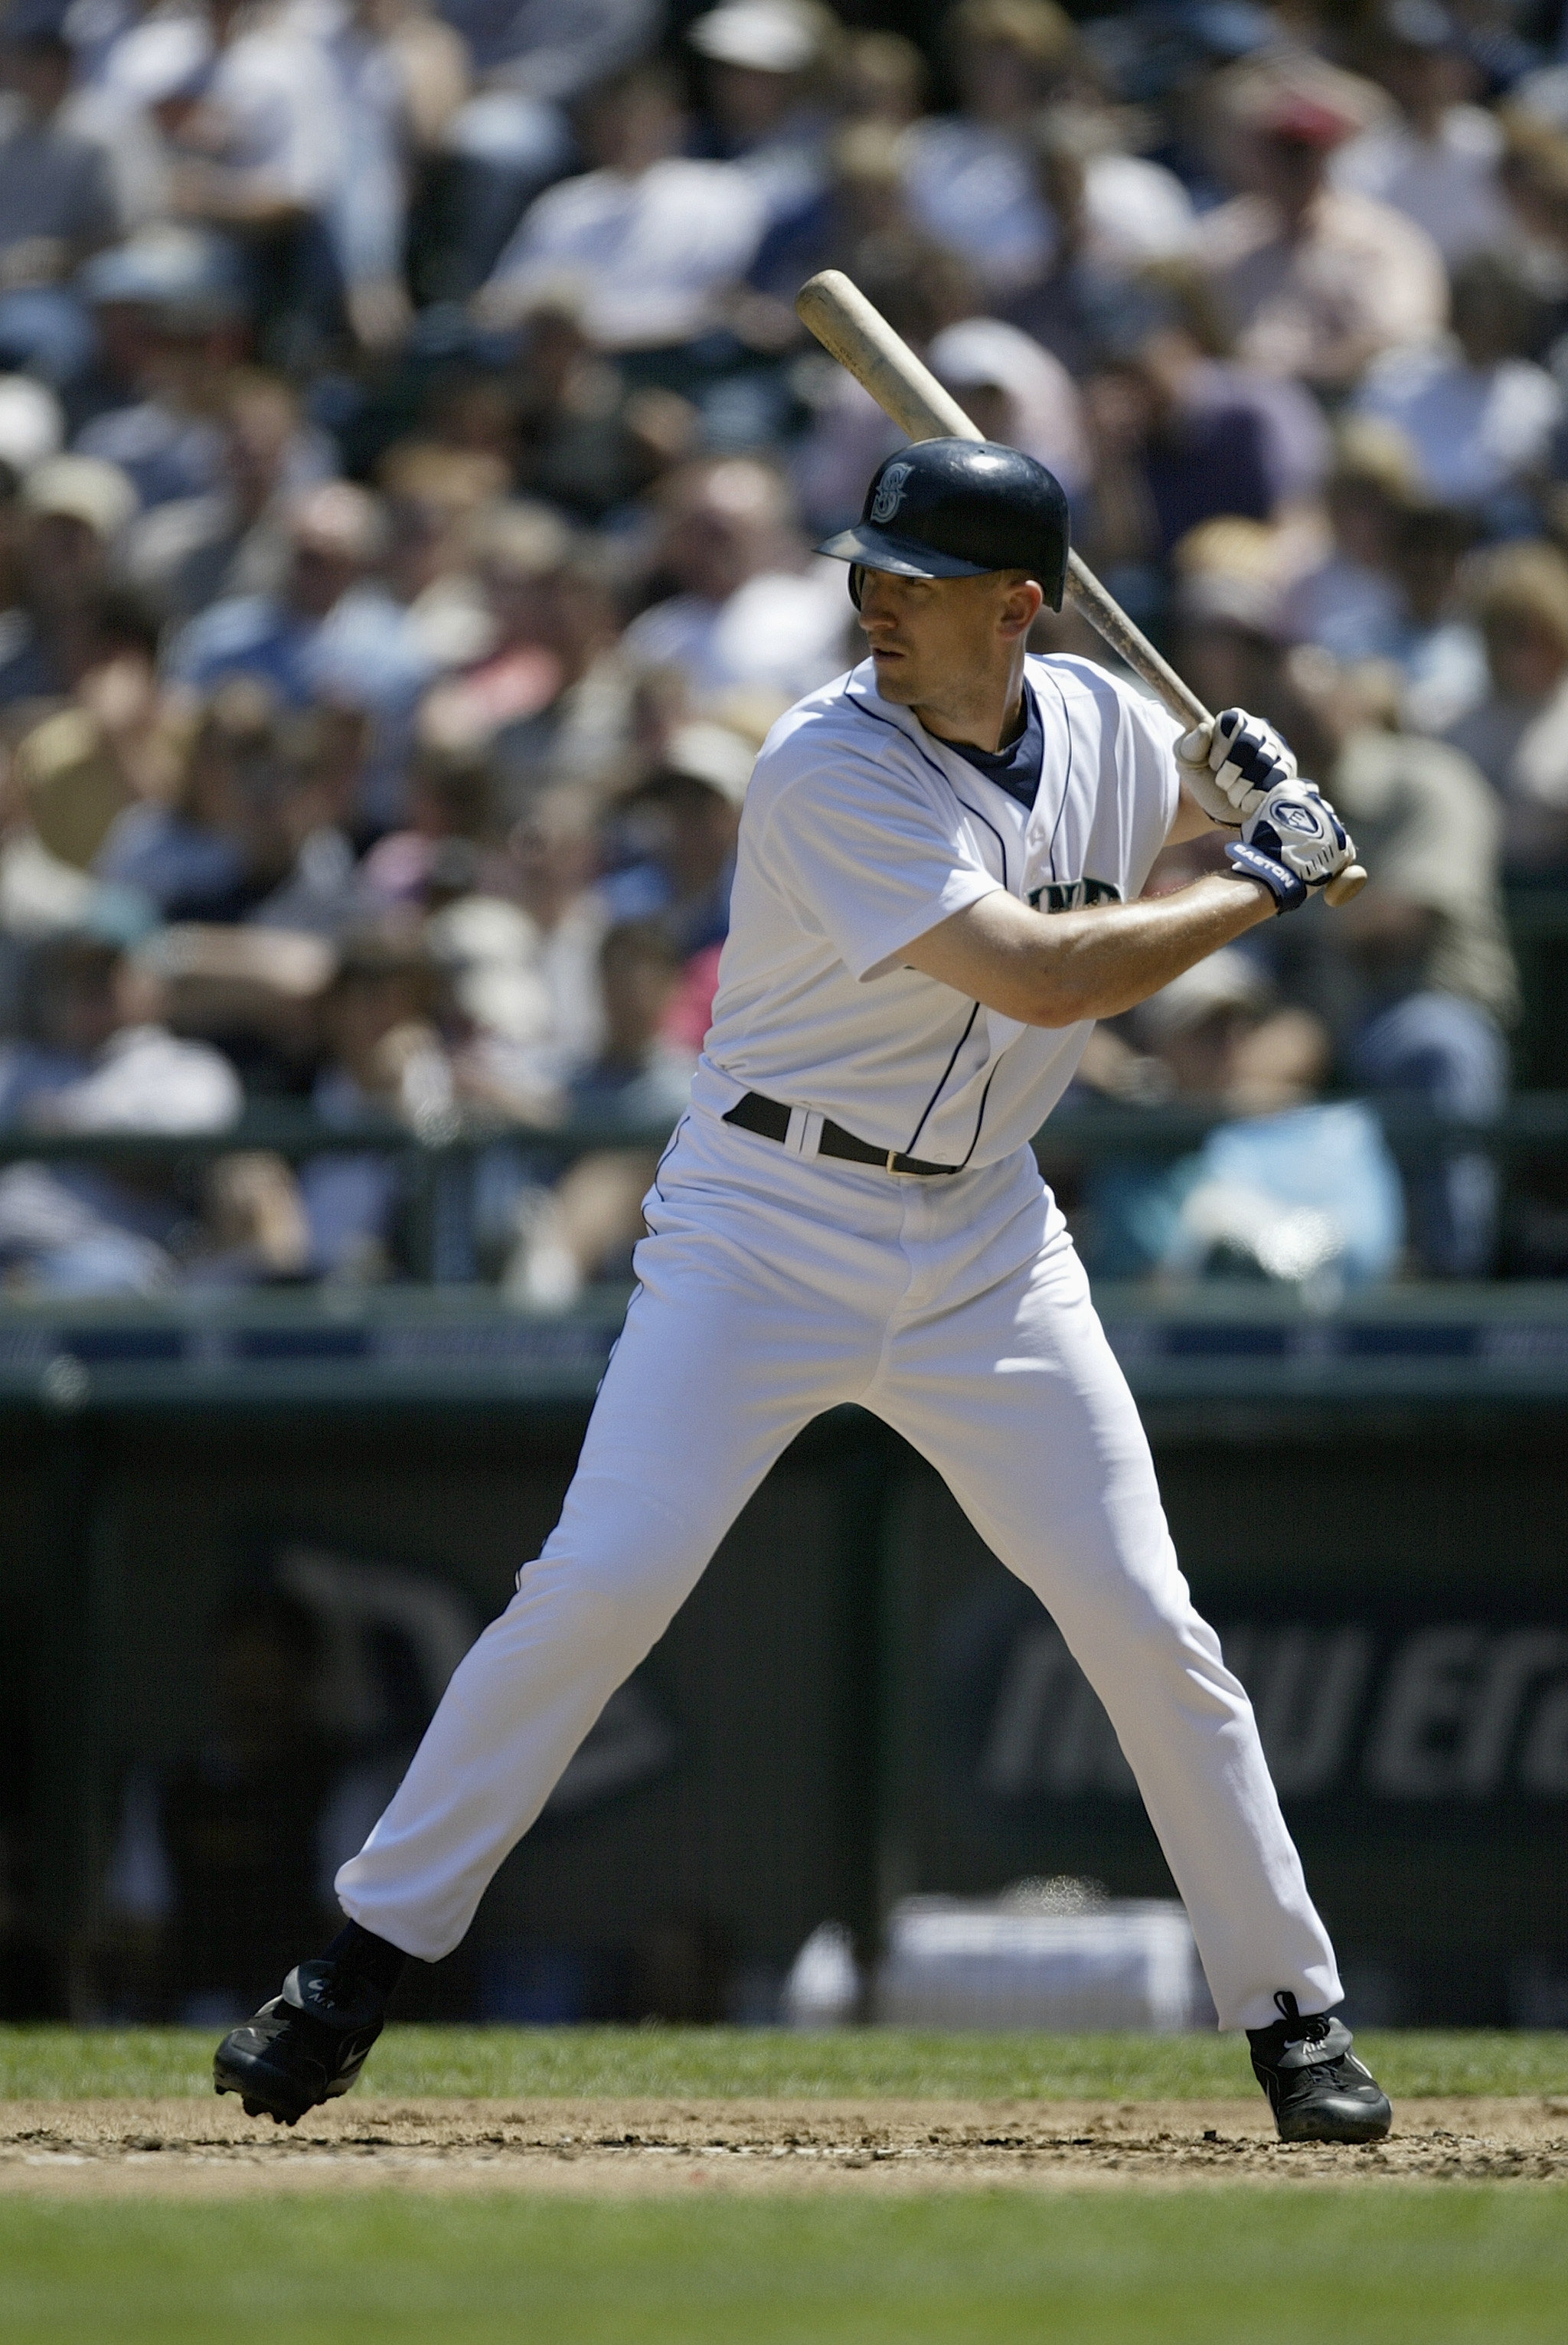 Seattle Mariners: The 15 Greatest Hitters in Team History